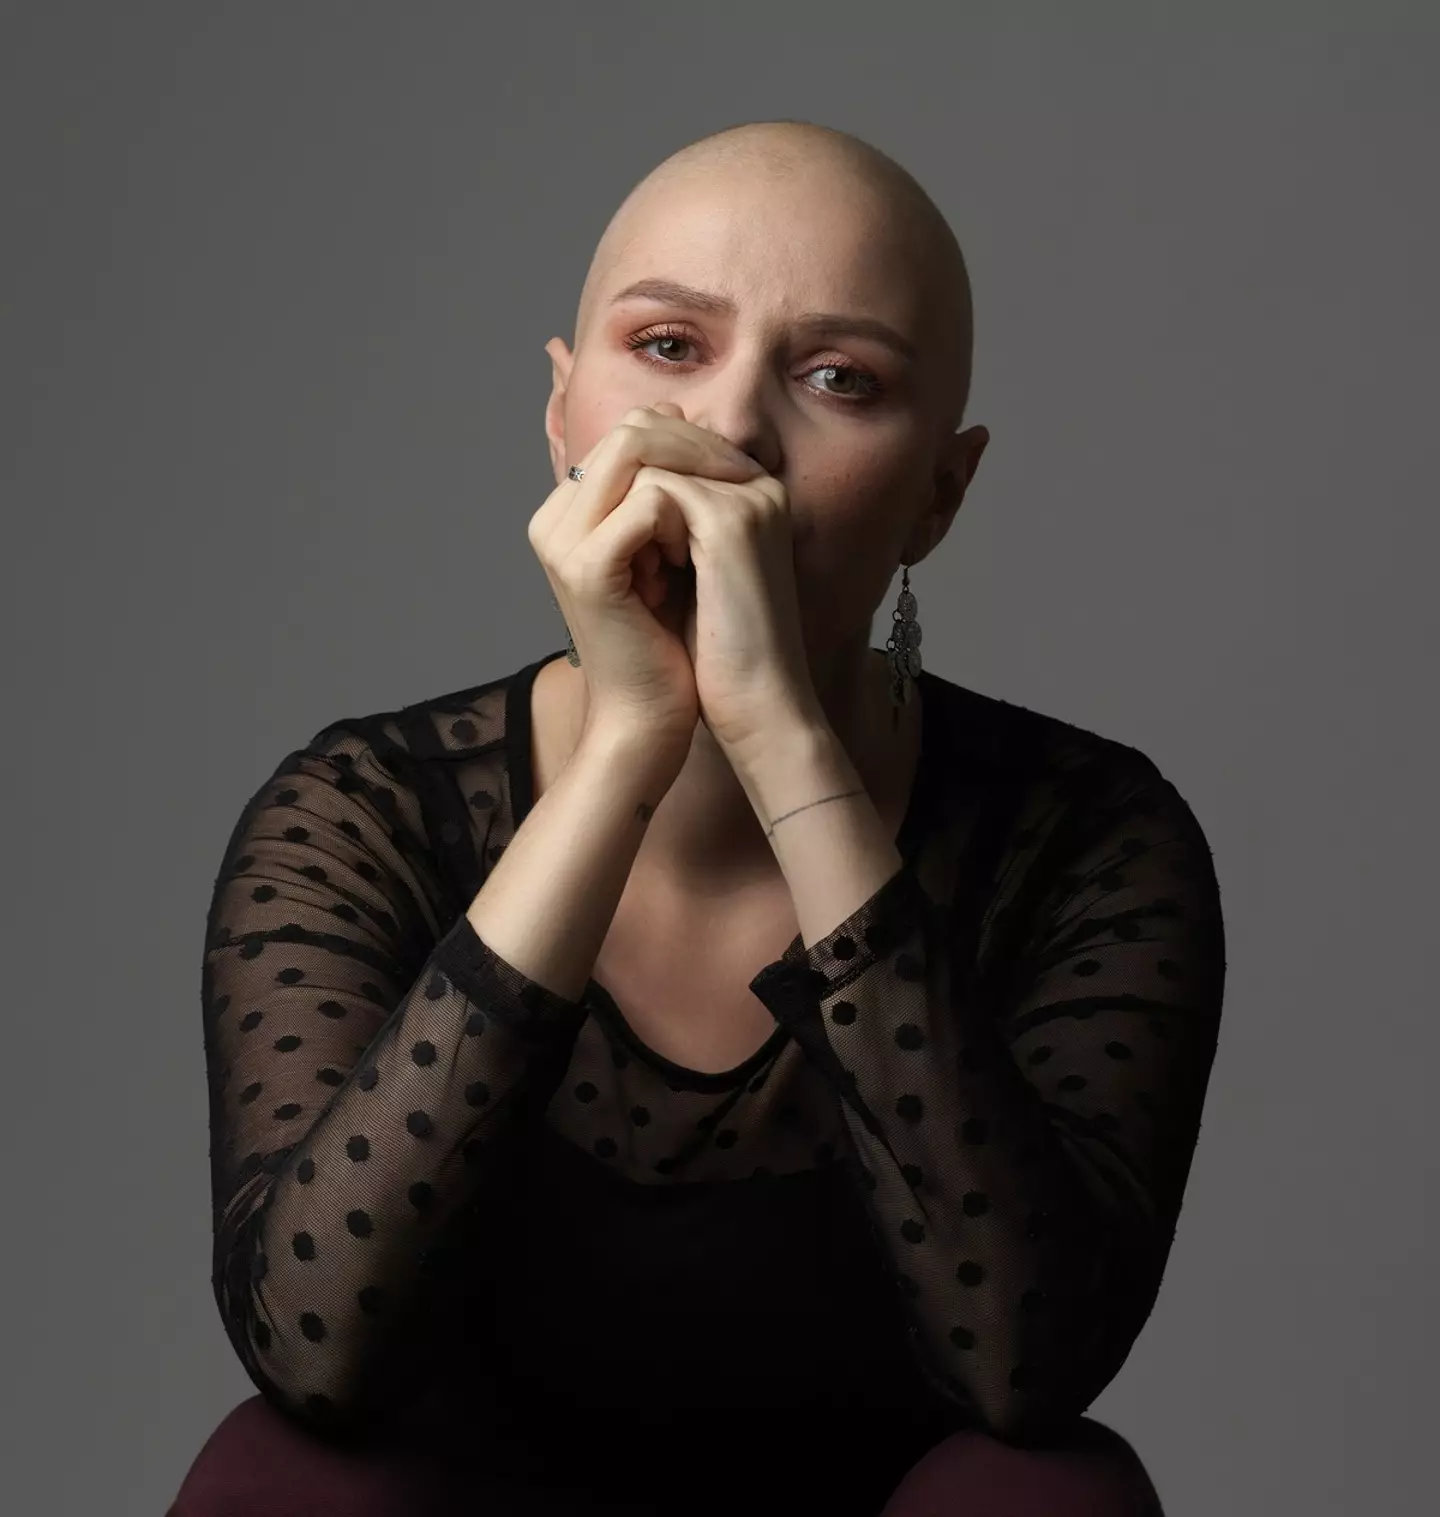 Laura Ricaud was told that her cancer had come back.